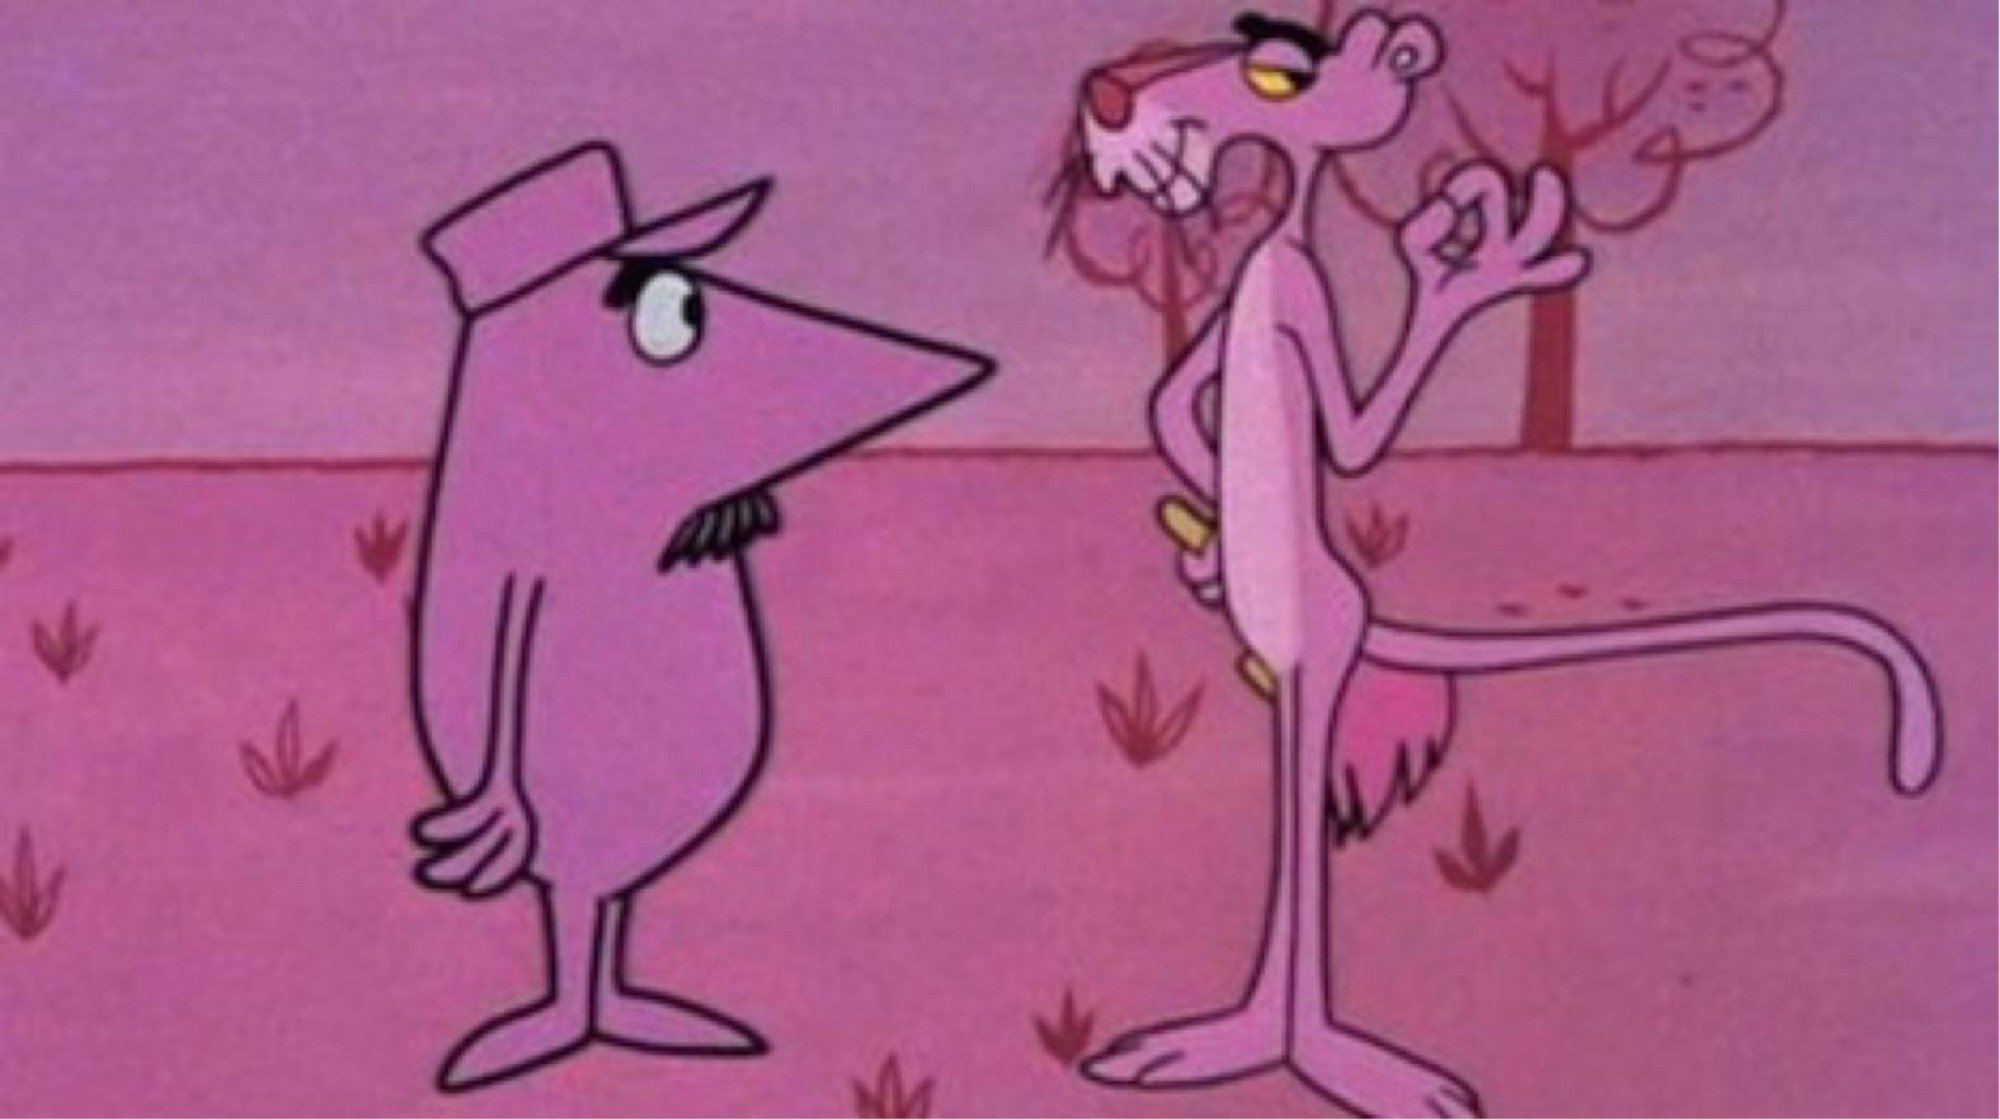 Why 'The Pink Panther' Season 1 Episode 1's History-Breaking Oscar